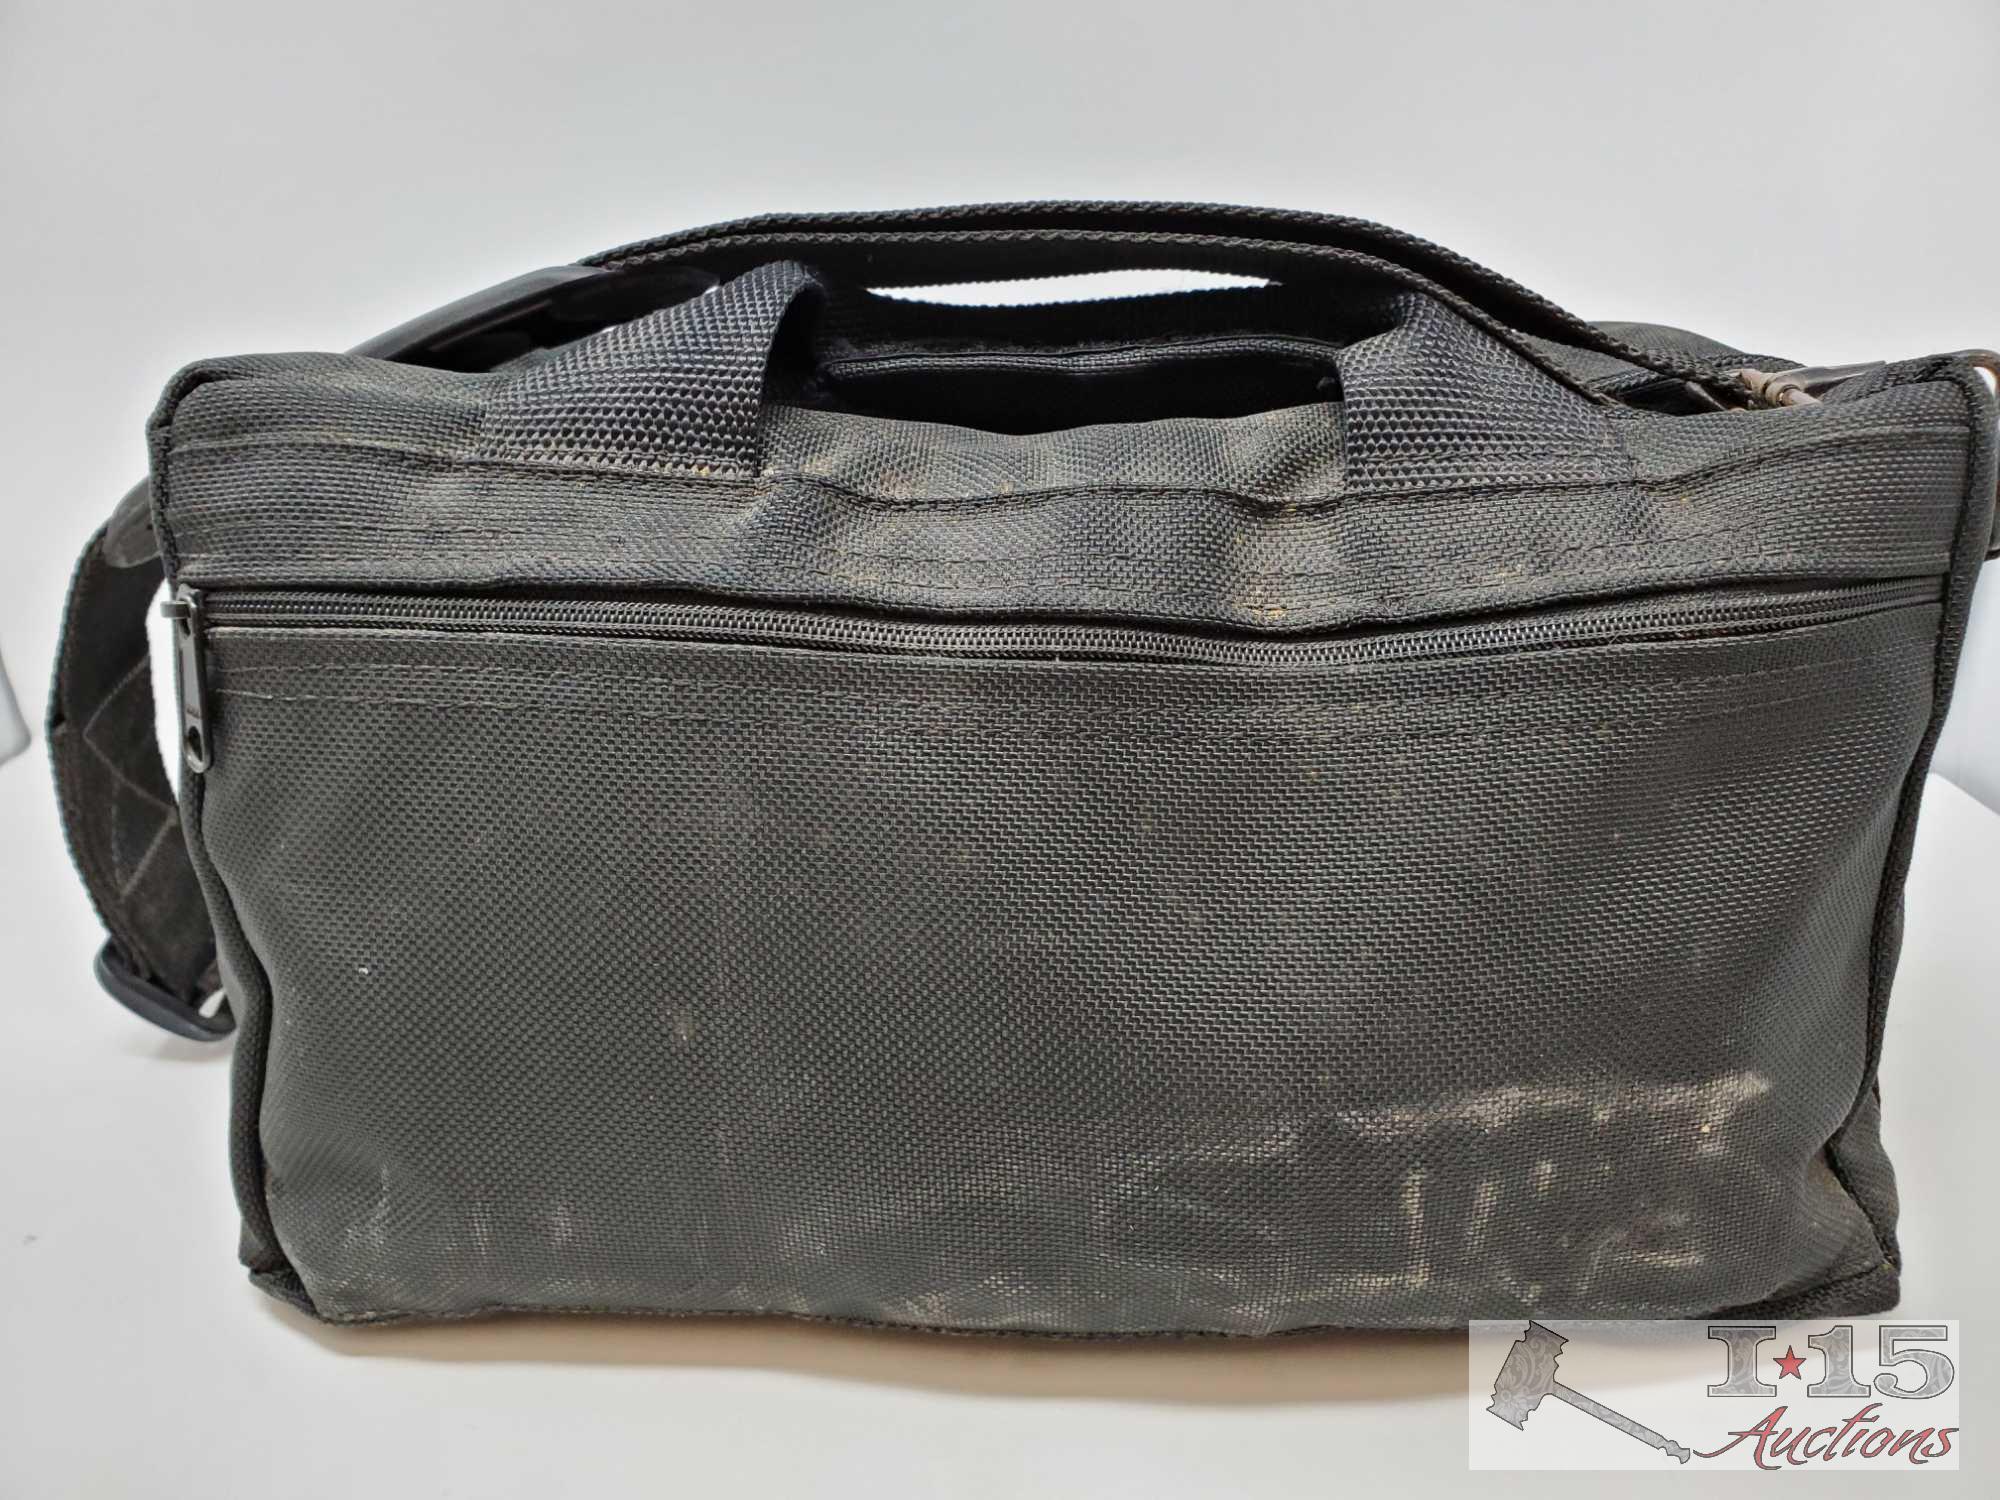 Luggage Systems Range Carry Bag w/ Shooting Systems Insert